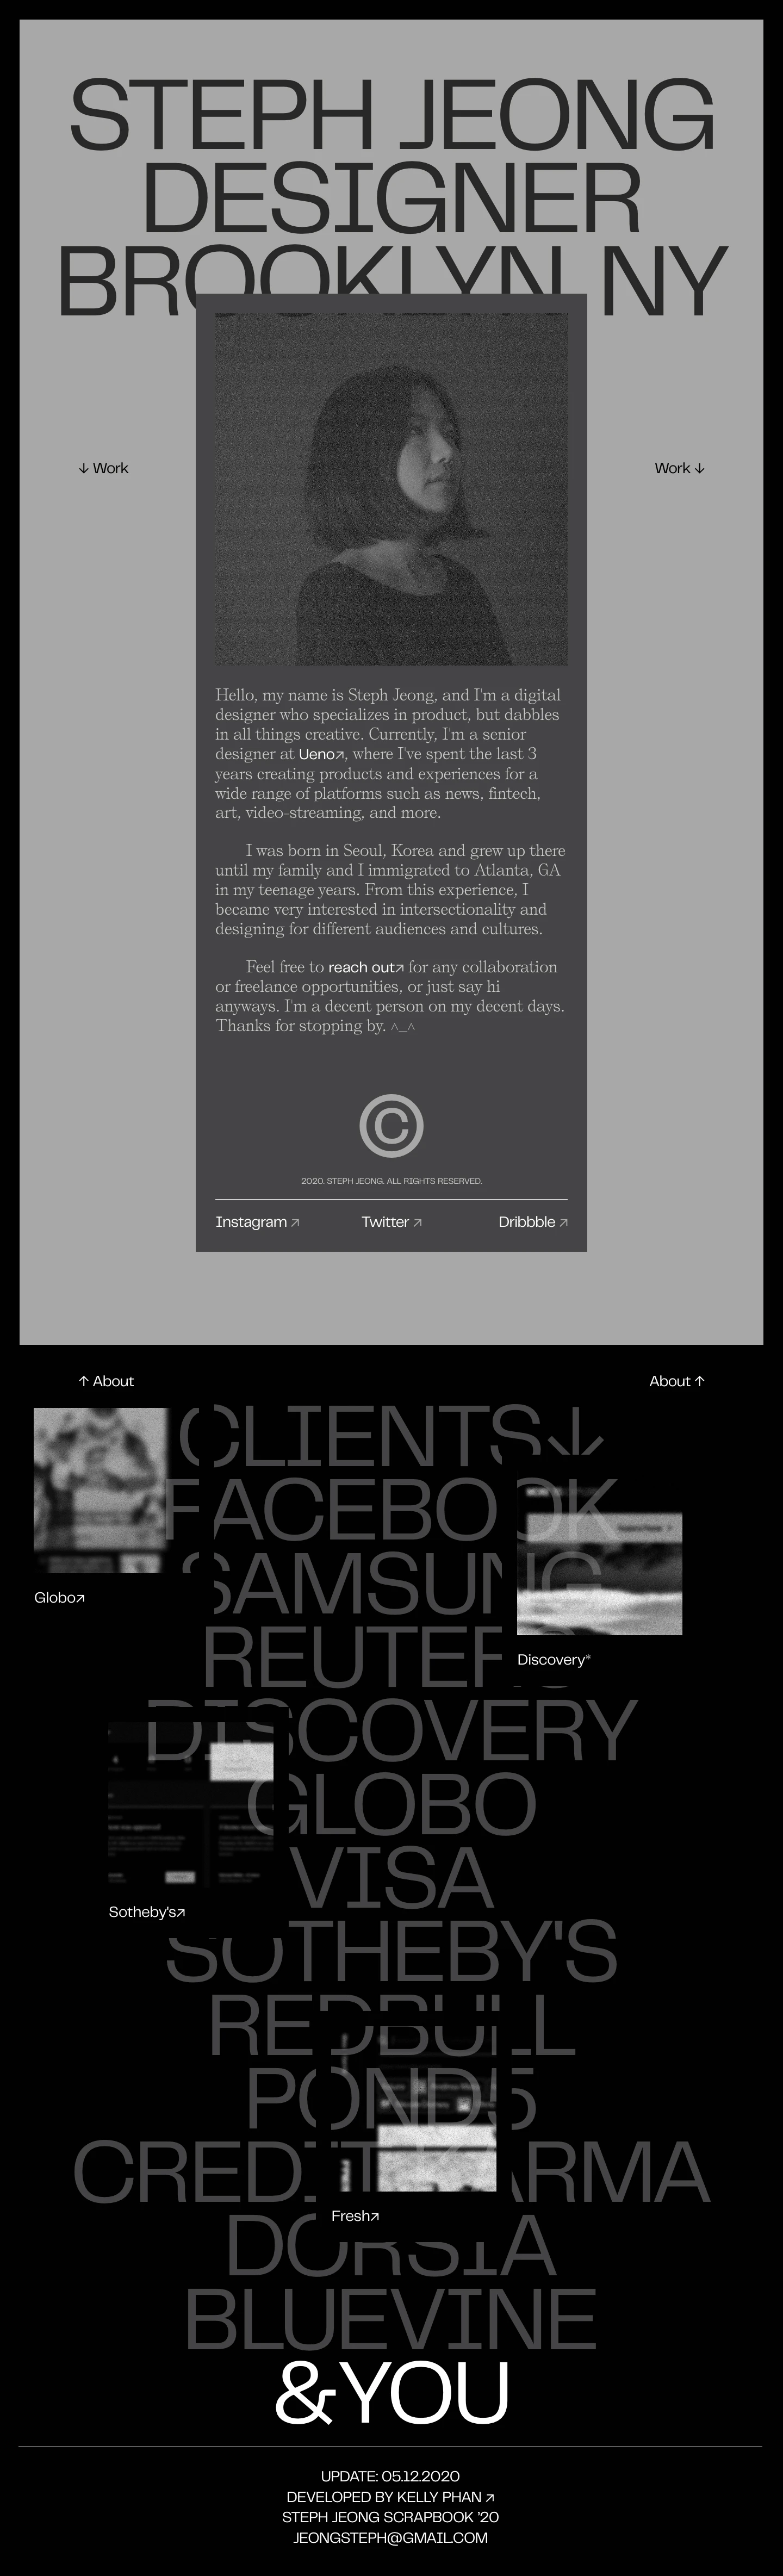 Stephanie Jeong Landing Page Example: Hello, my name is Steph Jeong, and I'm a digital designer who specializes in product, but dabbles in all things creative. Currently, I'm a senior designer at Ueno, where I've spent the last 3 years creating products and experiences for a wide range of platforms such as news, fintech, art, video-streaming, and more.